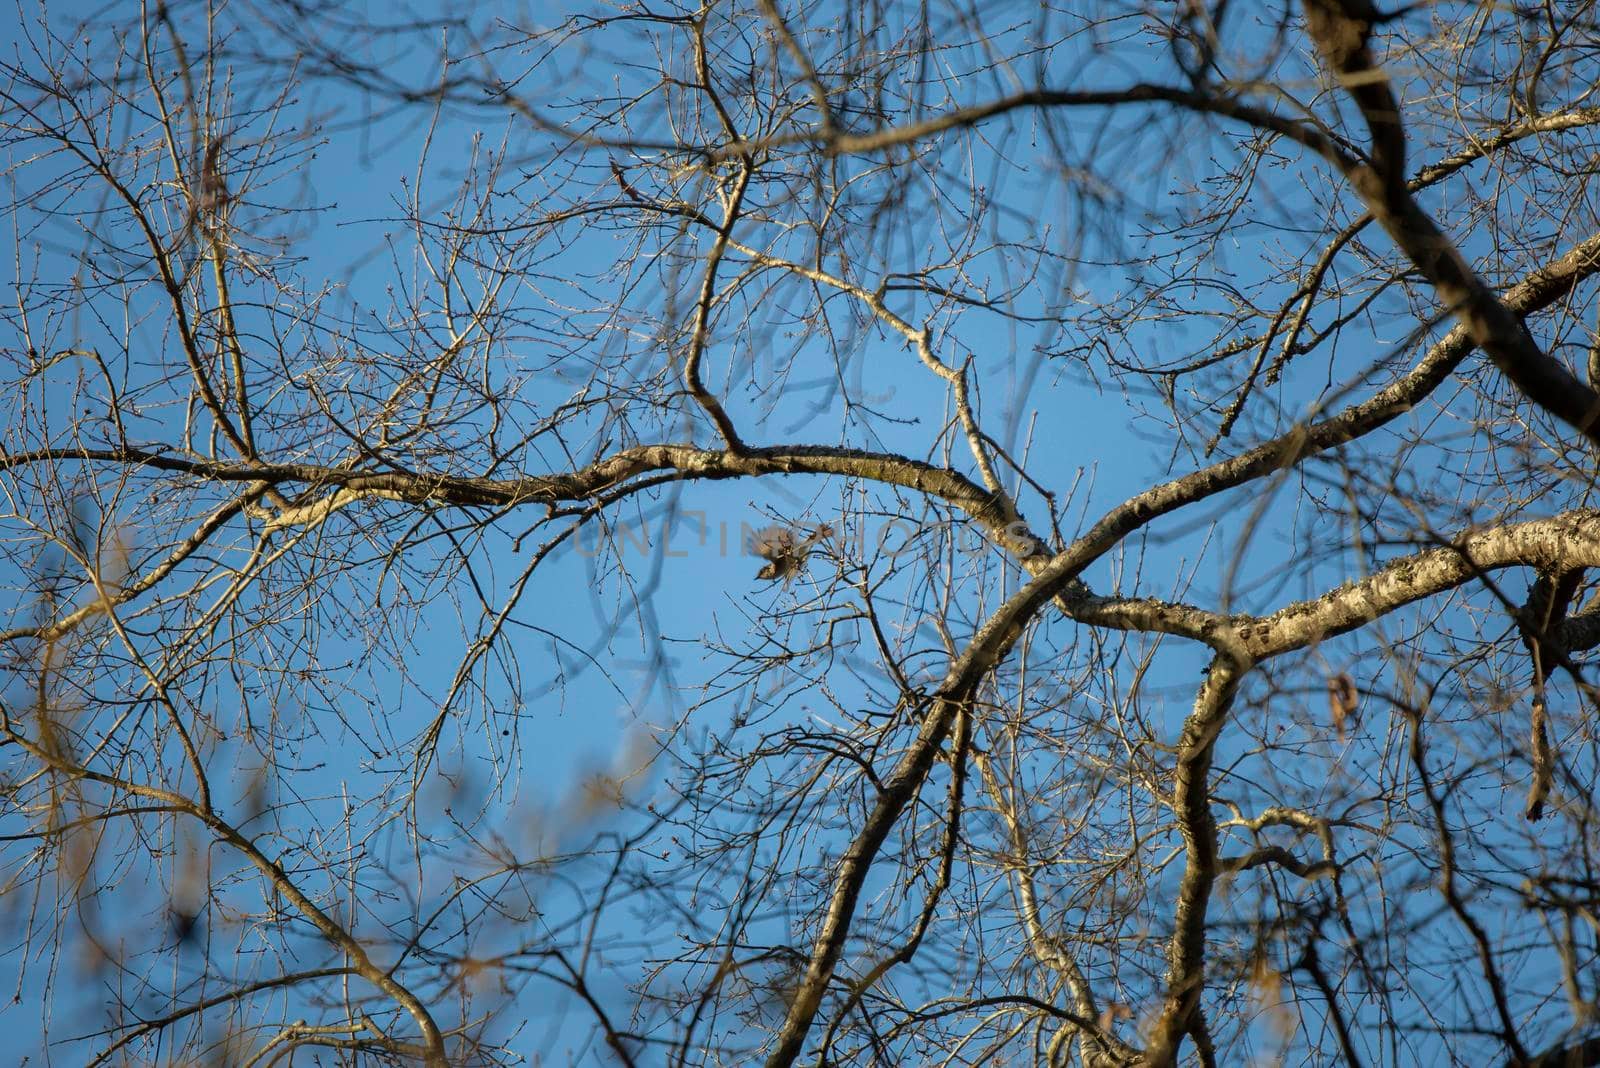 Eastern phoebe (Sayornis phoebe) in flight, diving from a tall tree branch